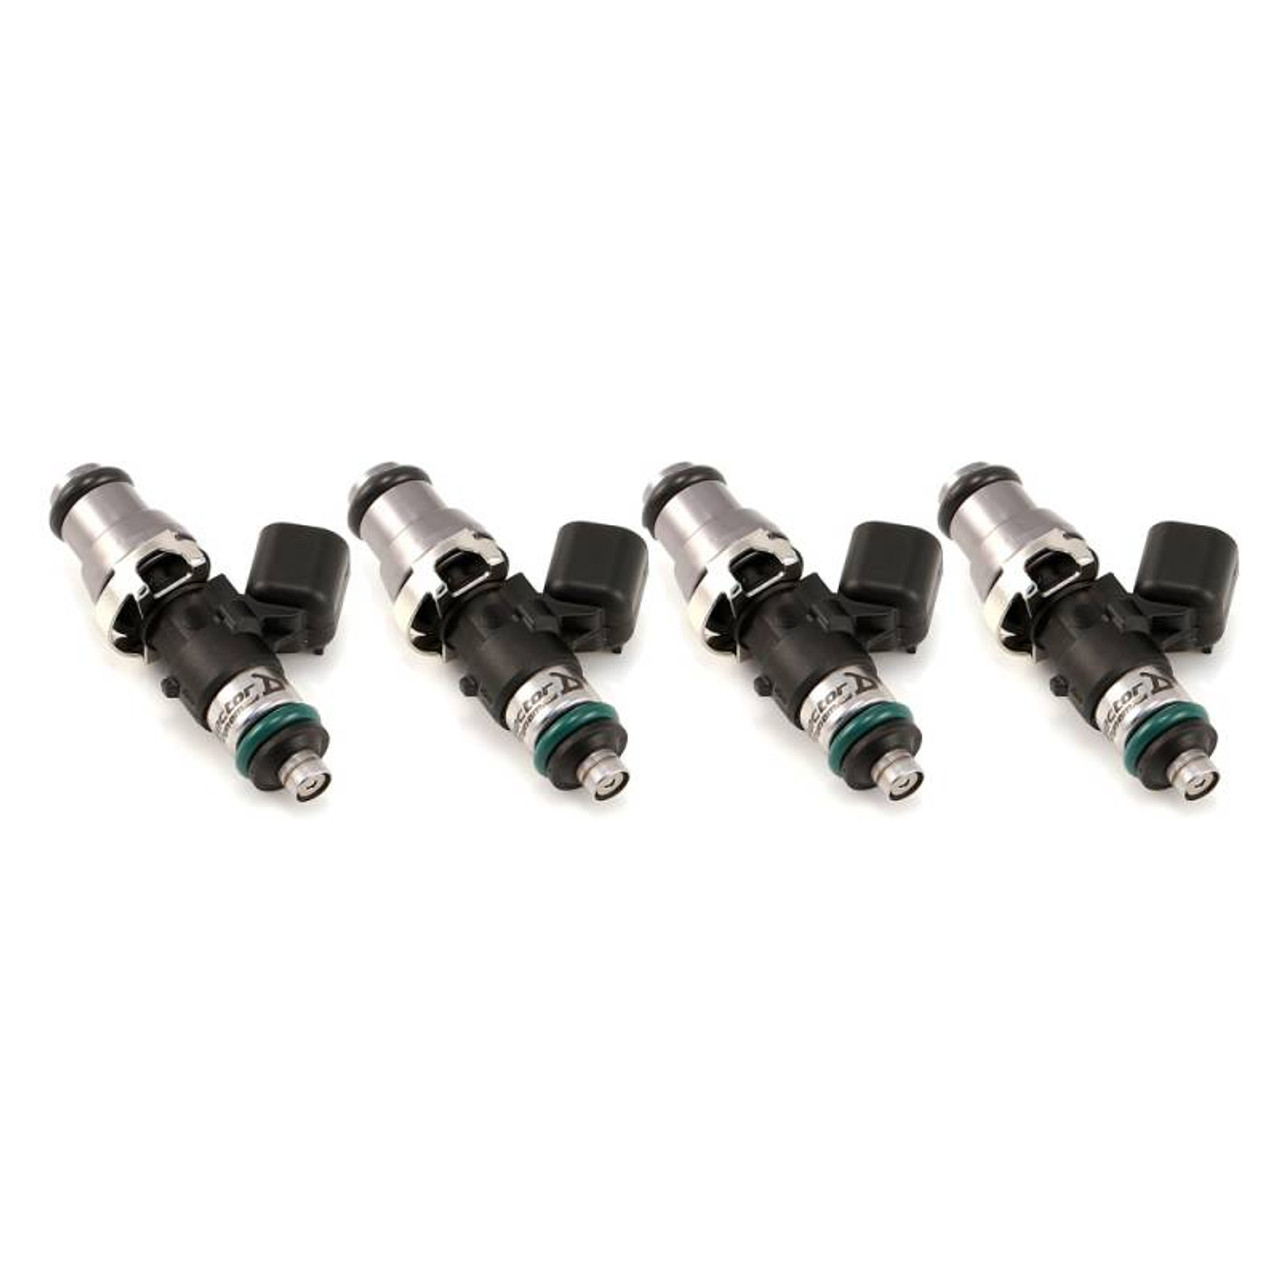 Injector Dynamics ID1300X Fuel Injectors For Chevy Cobalt SS - 1300.60.14.14B.4